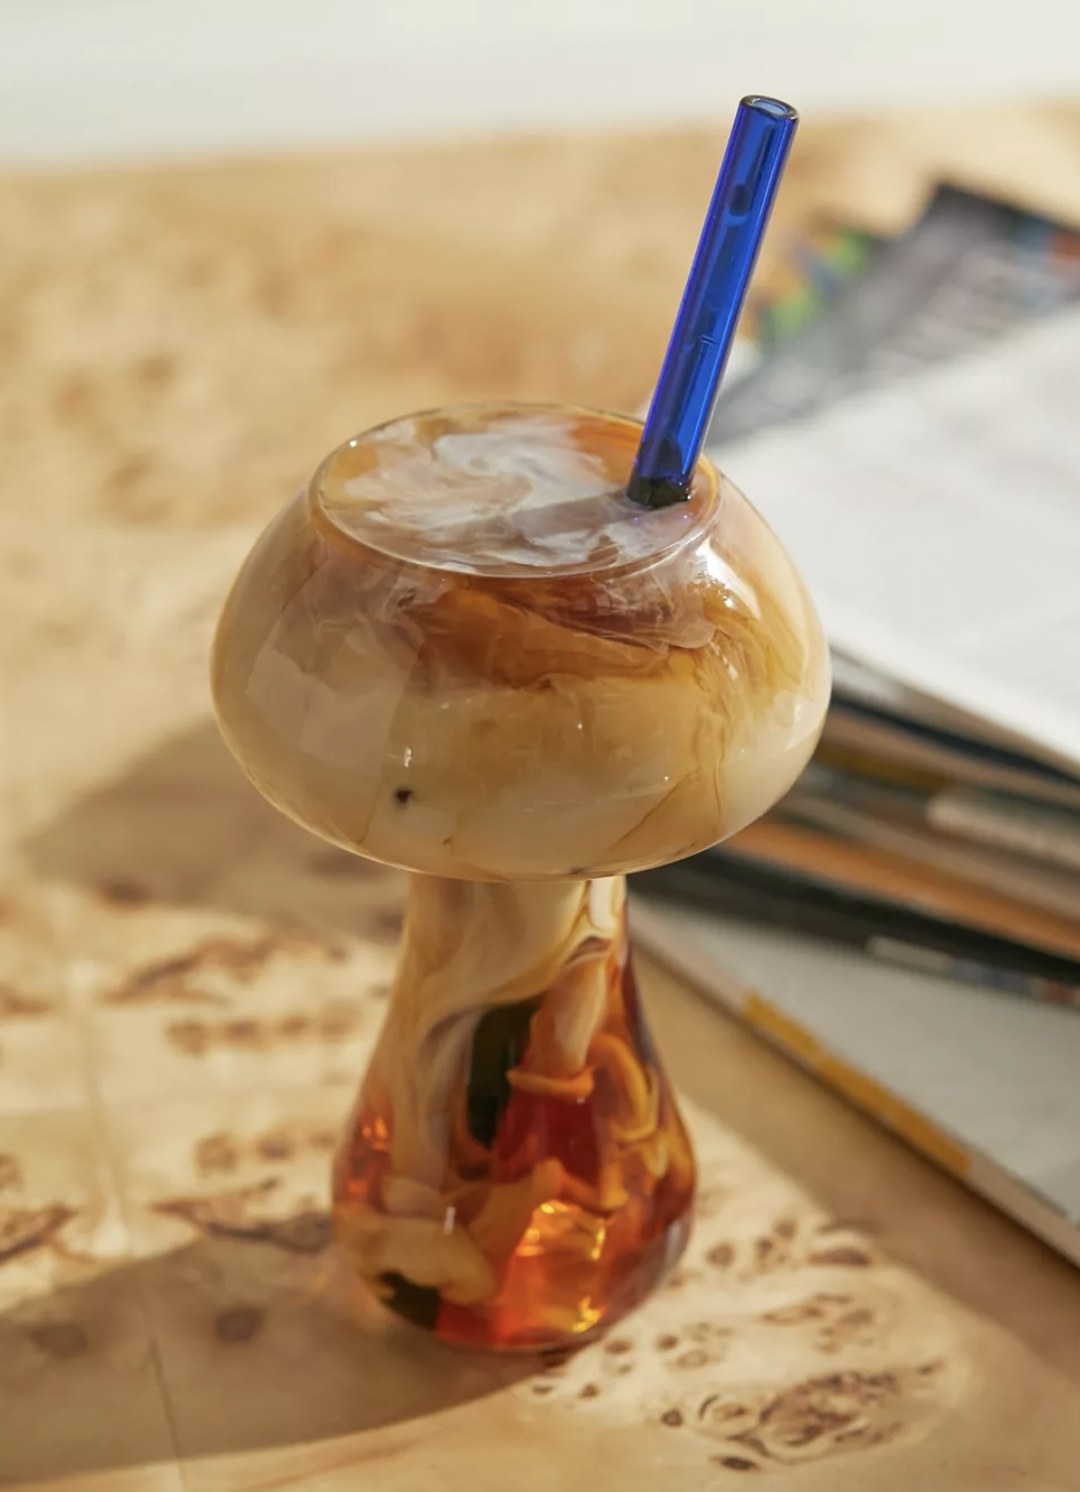 the mushroom glass with iced coffee in it